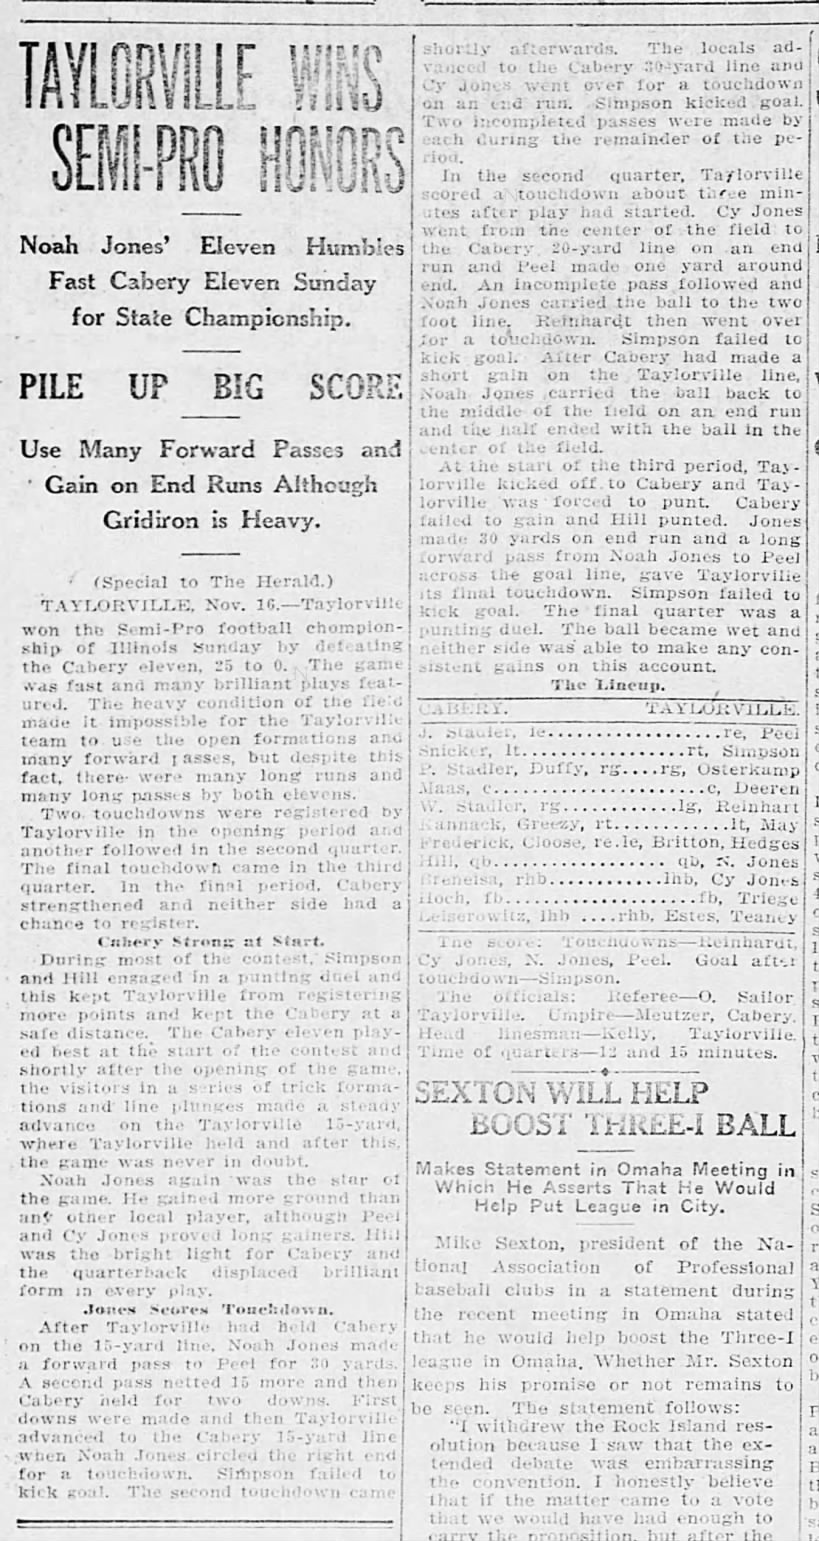 Cabery - Looses to Taylorville in State Championship - Nov 1914